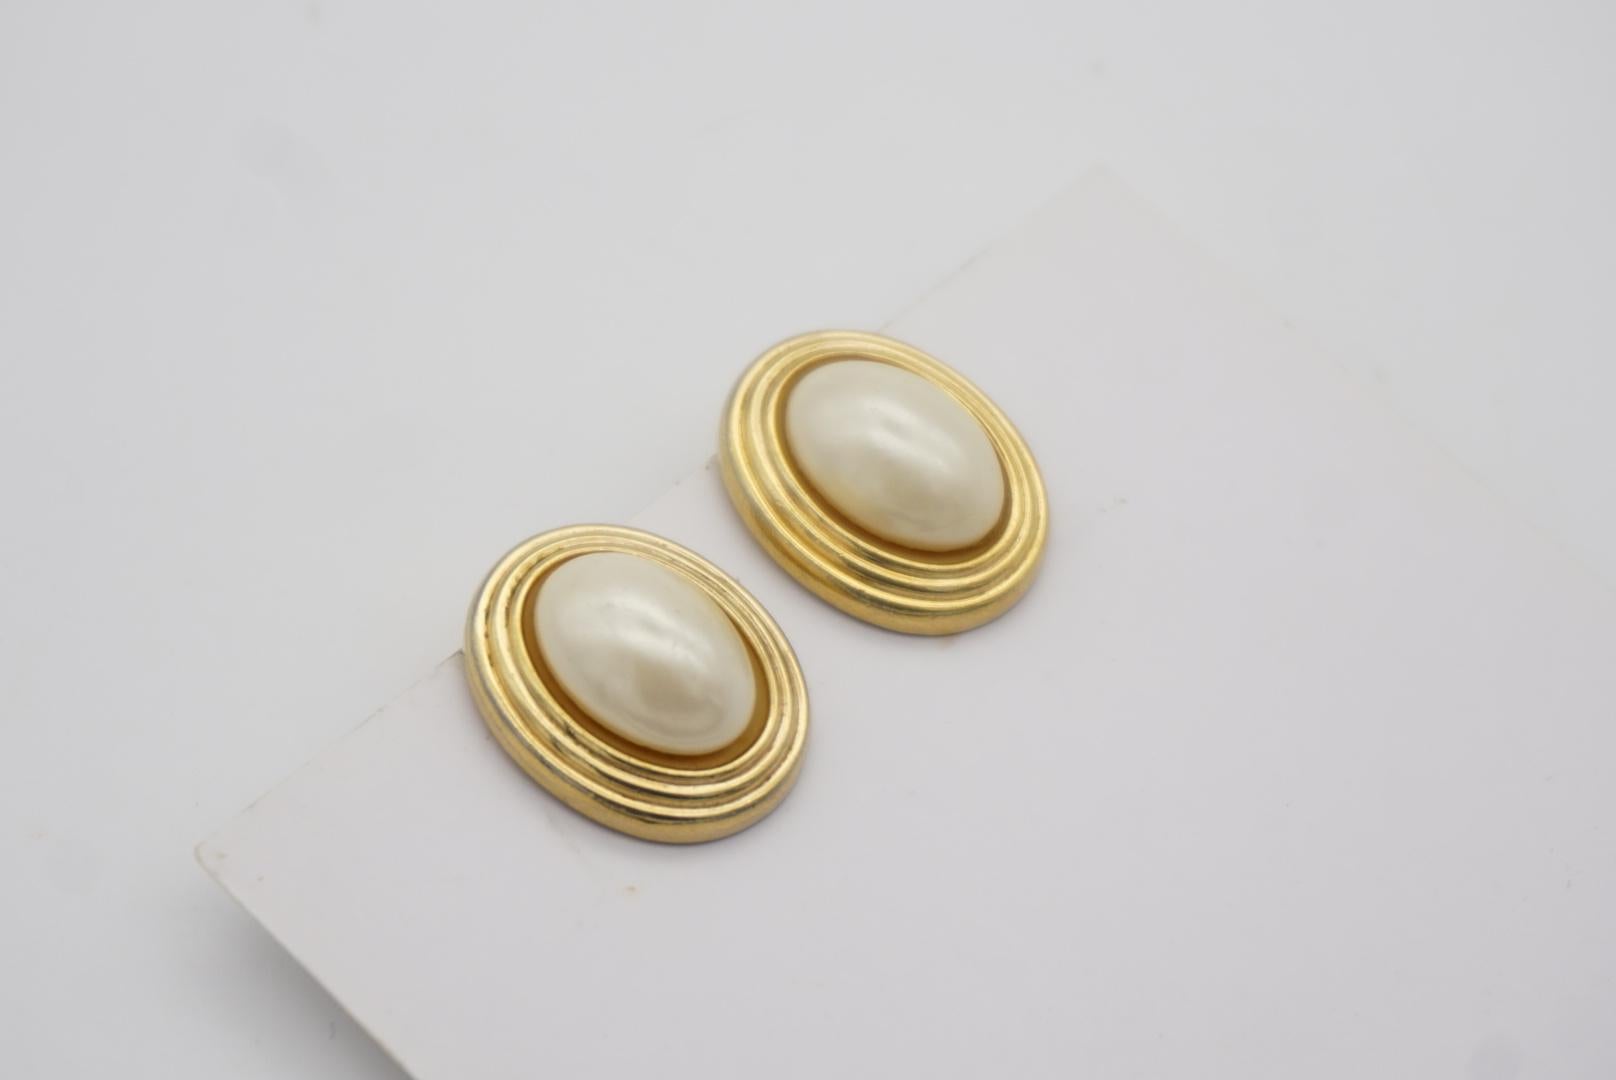 Christian Dior Vintage 1980s Large Oval White Pearl Elegant Gold Clip Earrings For Sale 2